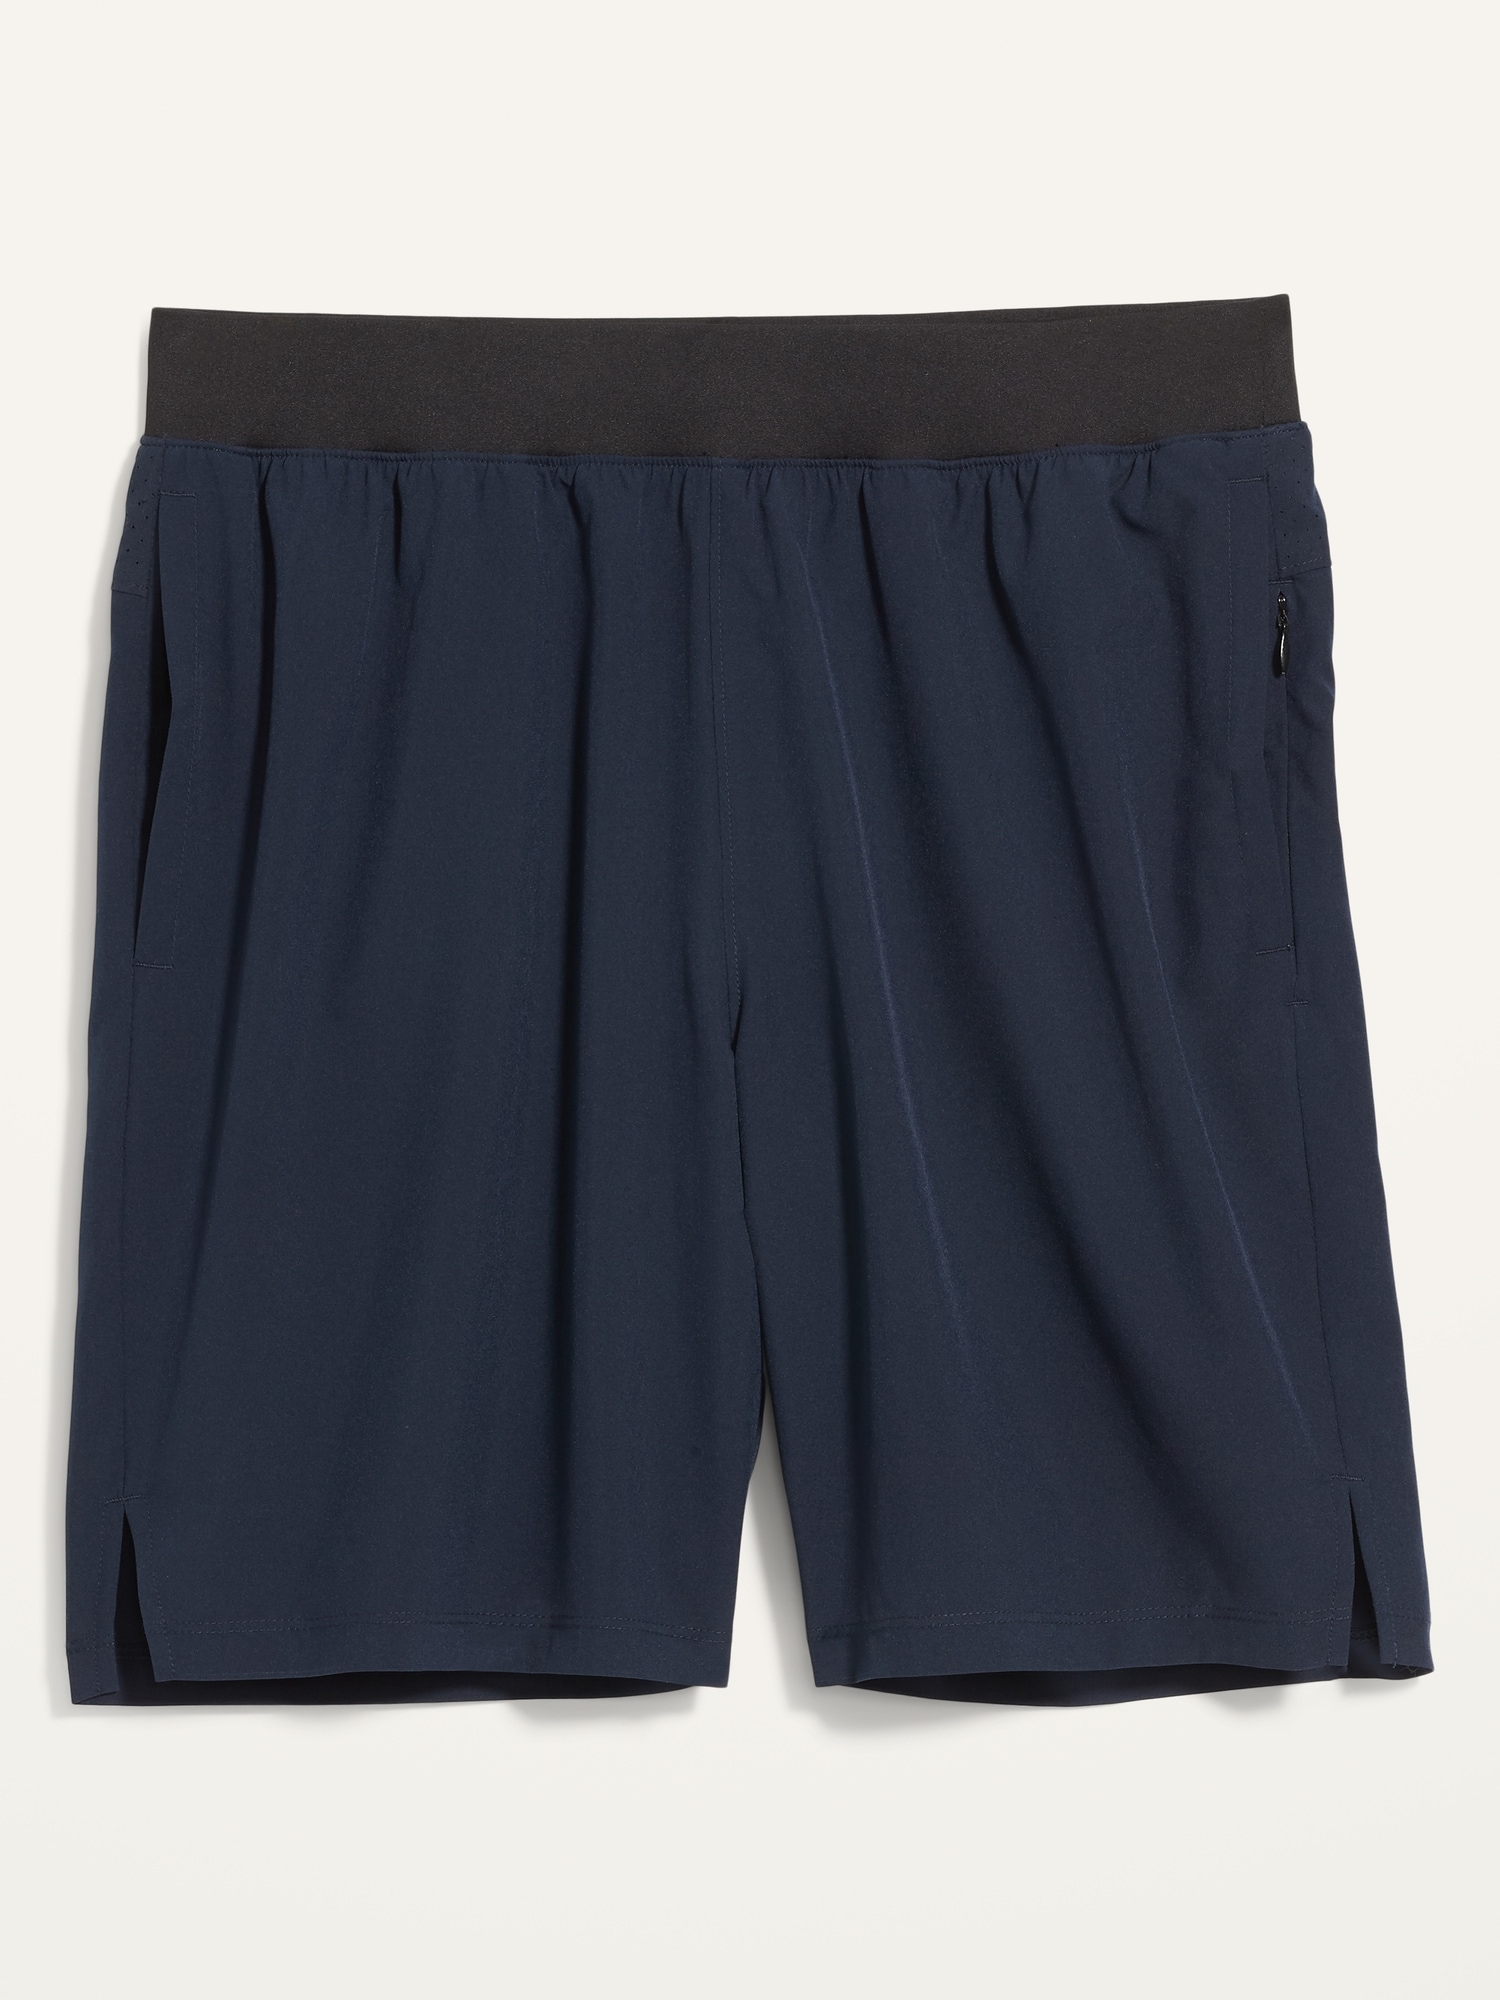 Go-Dry Cool Run Shorts for Men -- 9-inch inseam